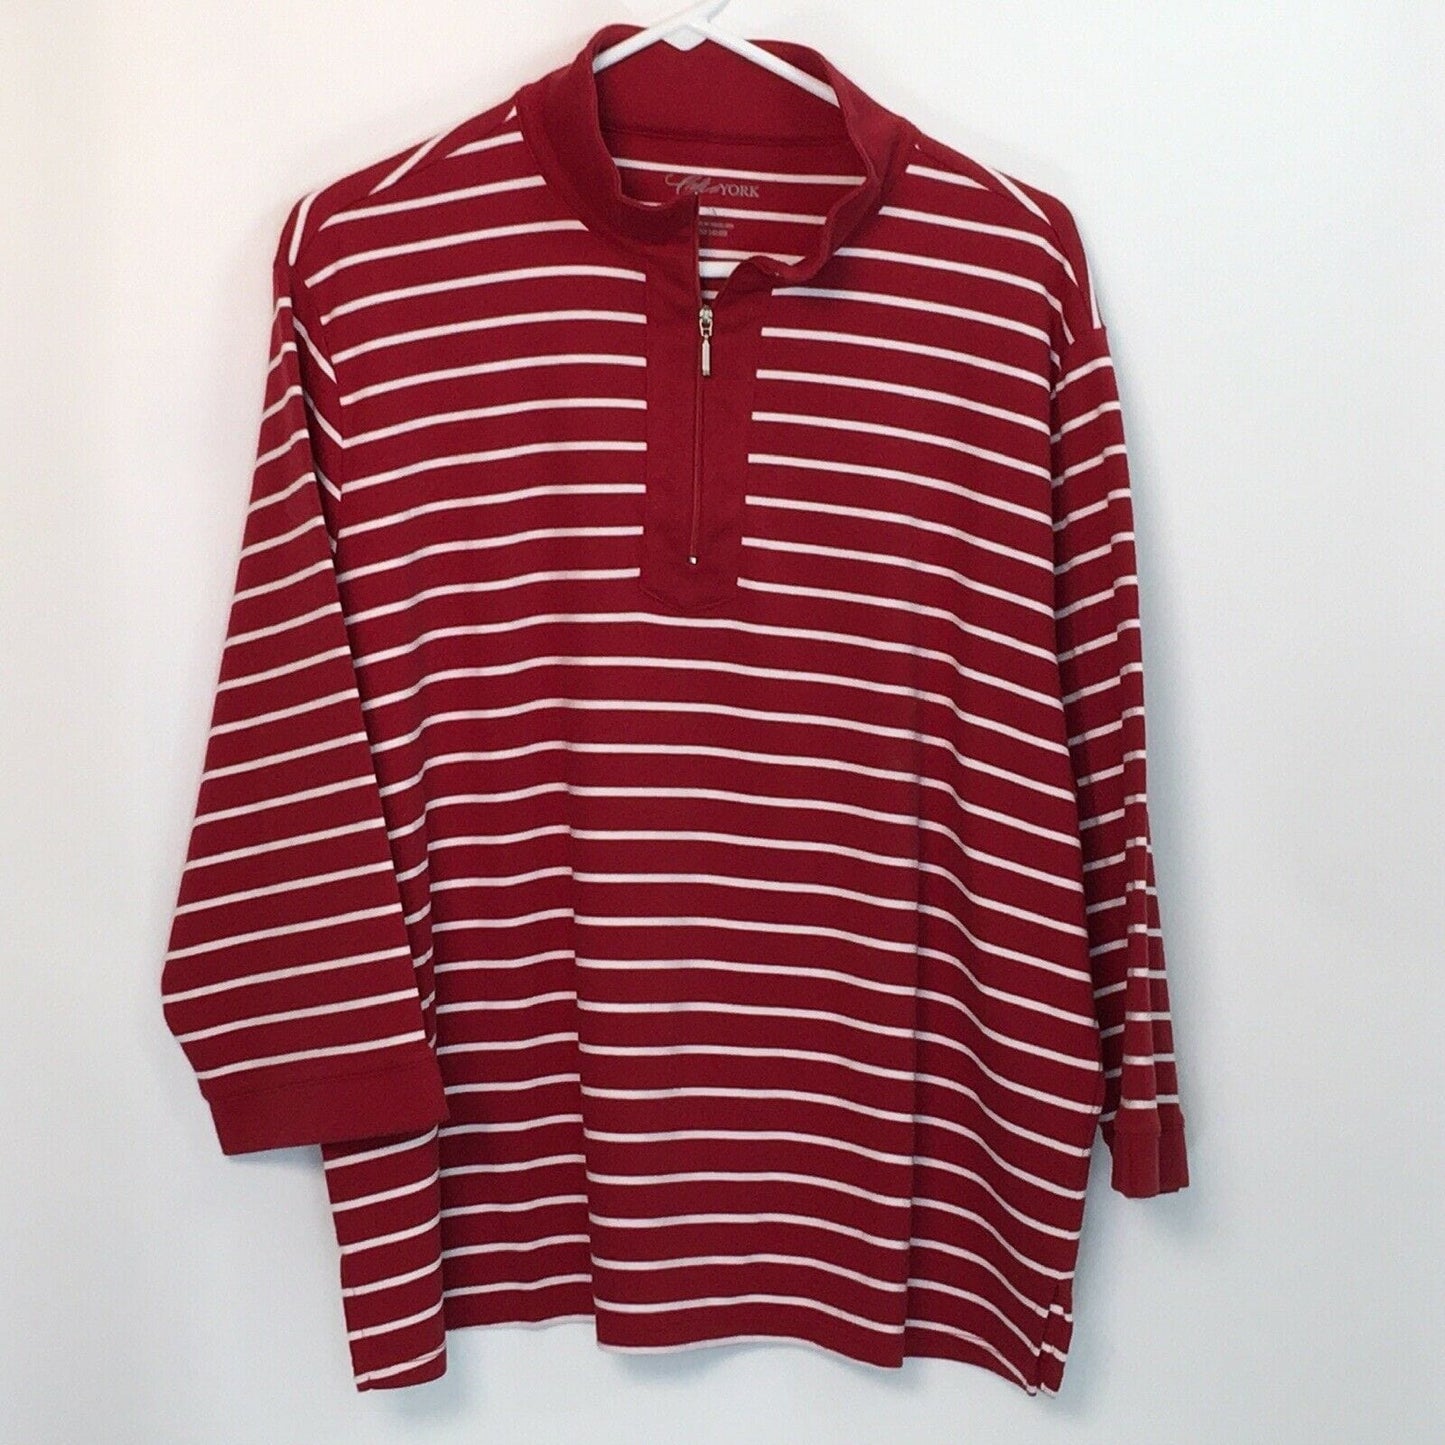 Cali & York Womens Pullover Top Casual Sweater, Red / White Striped - Size 2X - parsimonyshoppes